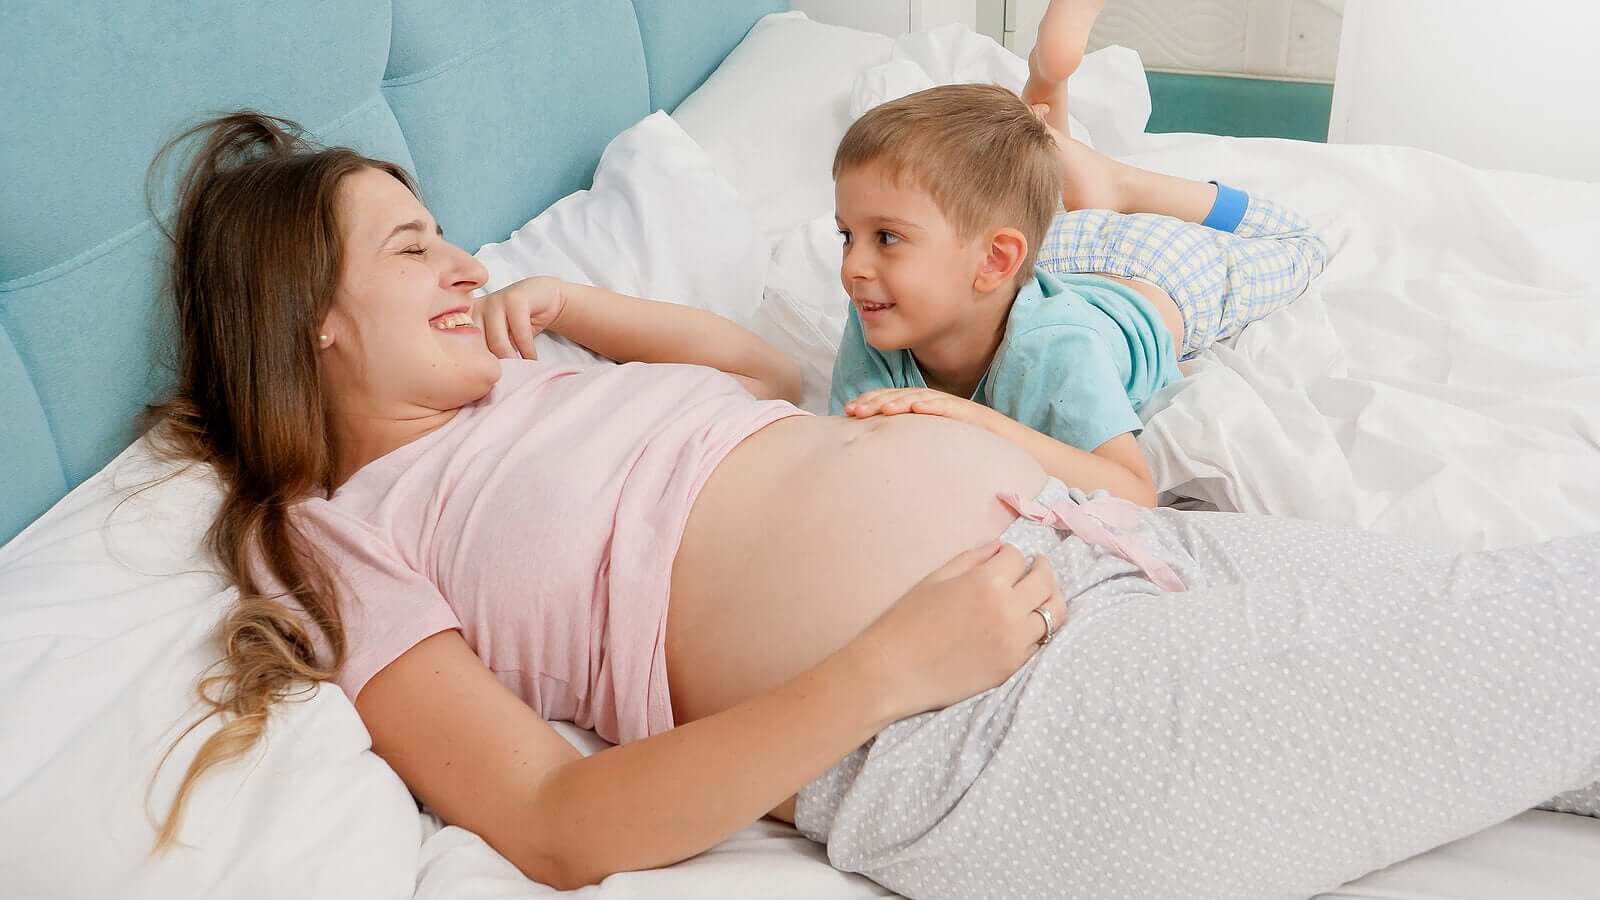 A pregnant woman lying in bed while her son puts his hand on her growing belly.